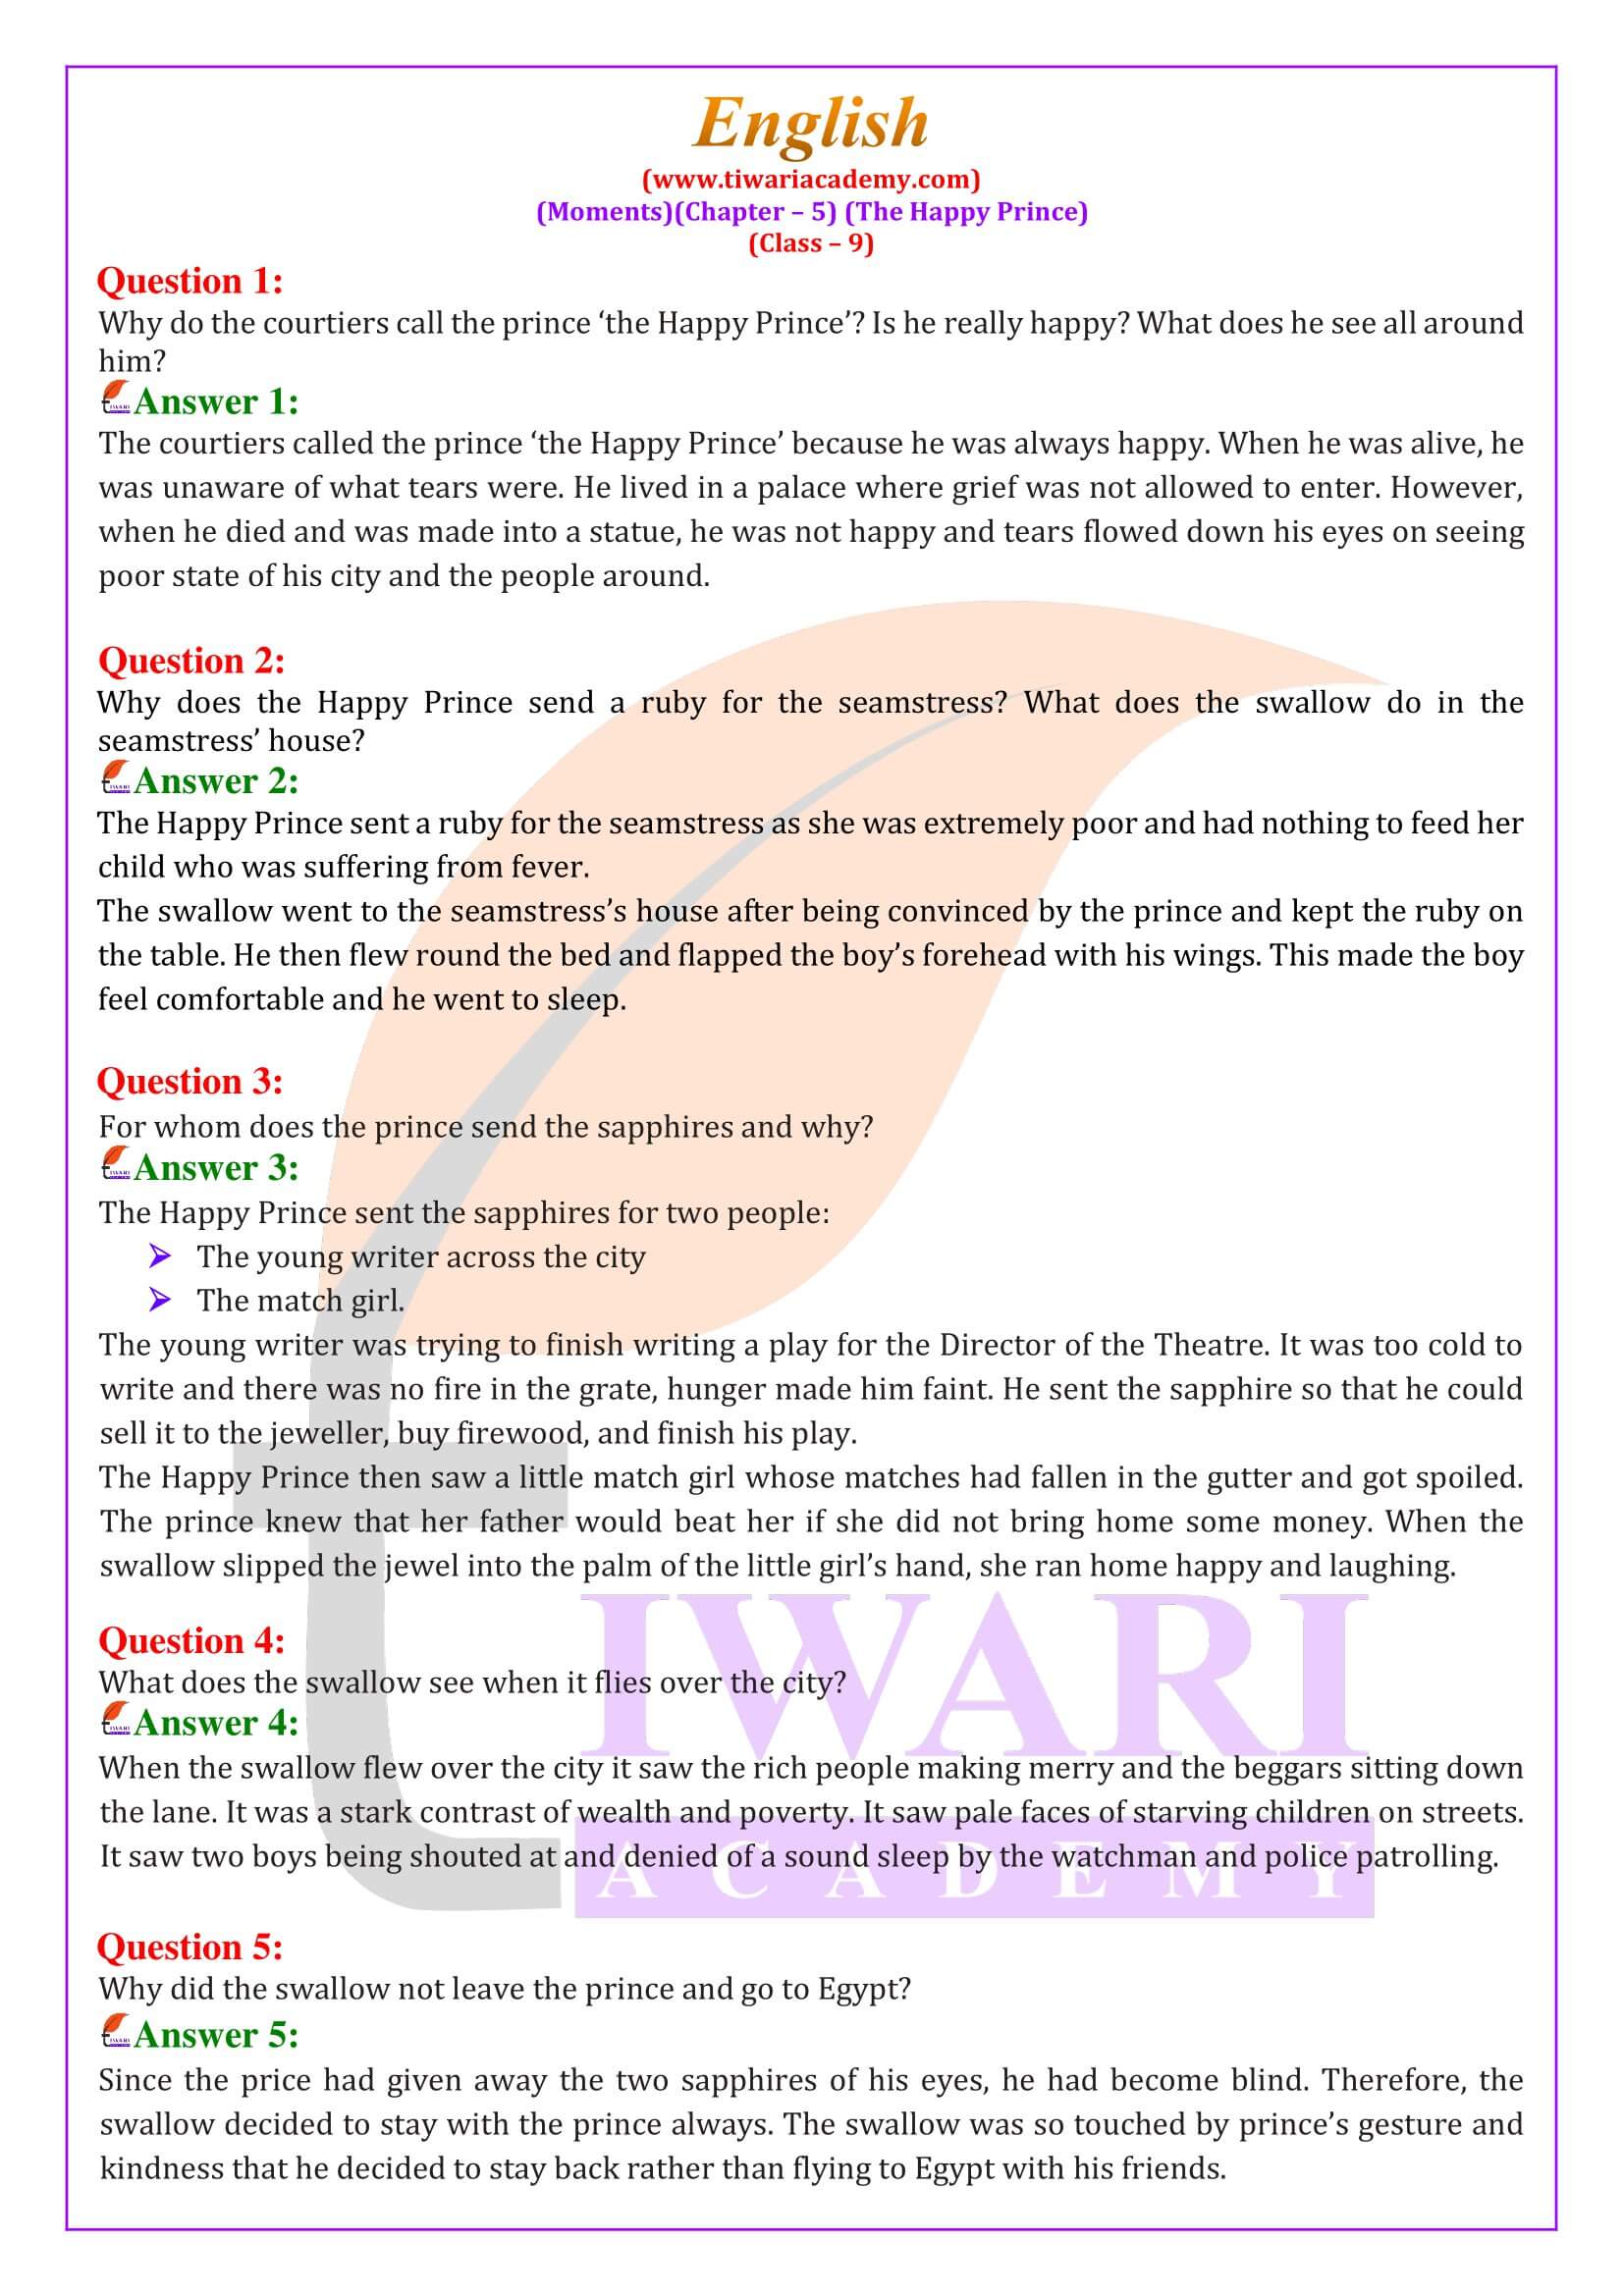 NCERT Solutions for Class 9 English Moments Chapter 5